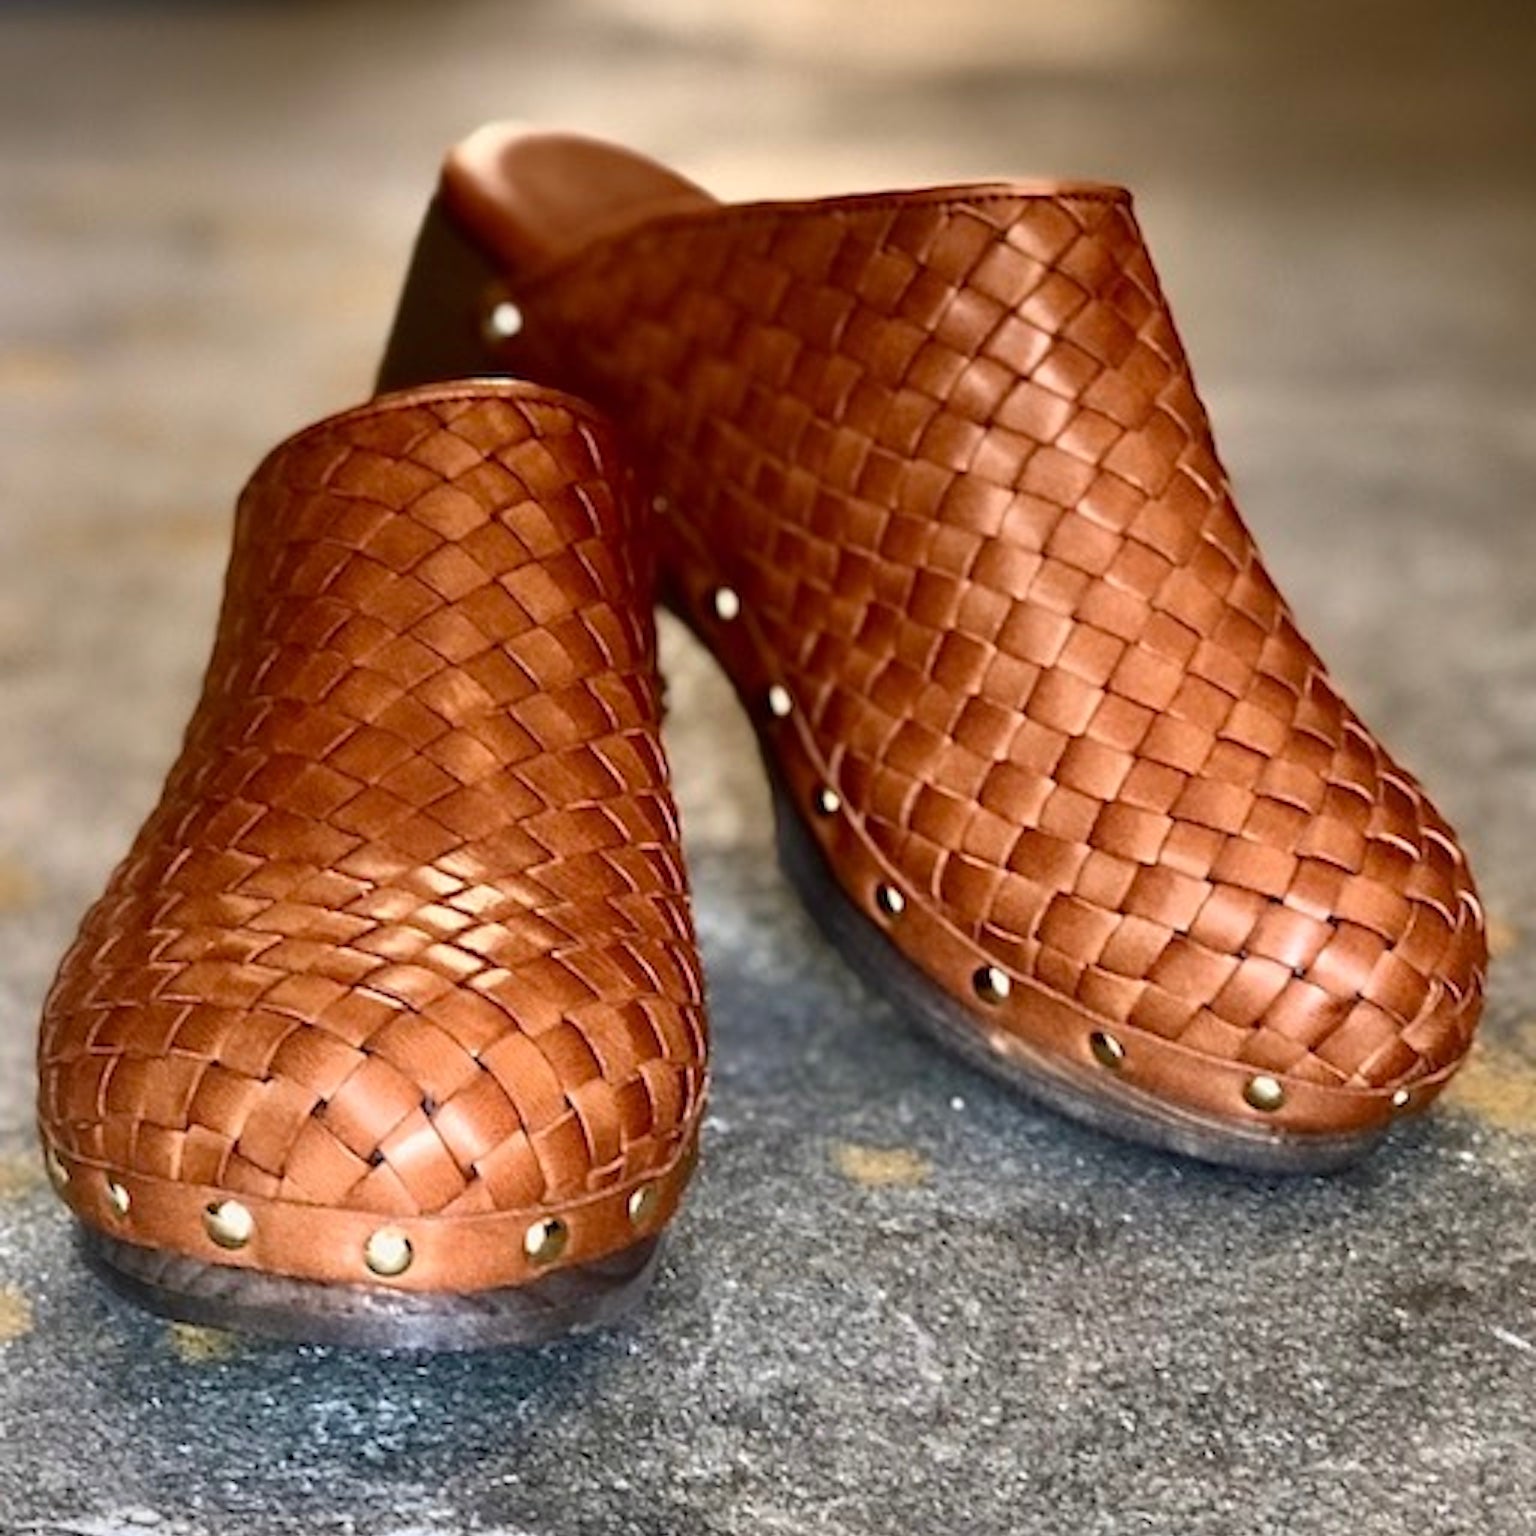 LABEL17 present the Clogs Tresse in Cognac, with VIBRAM Sole, hand-braided lamb Nappaleather